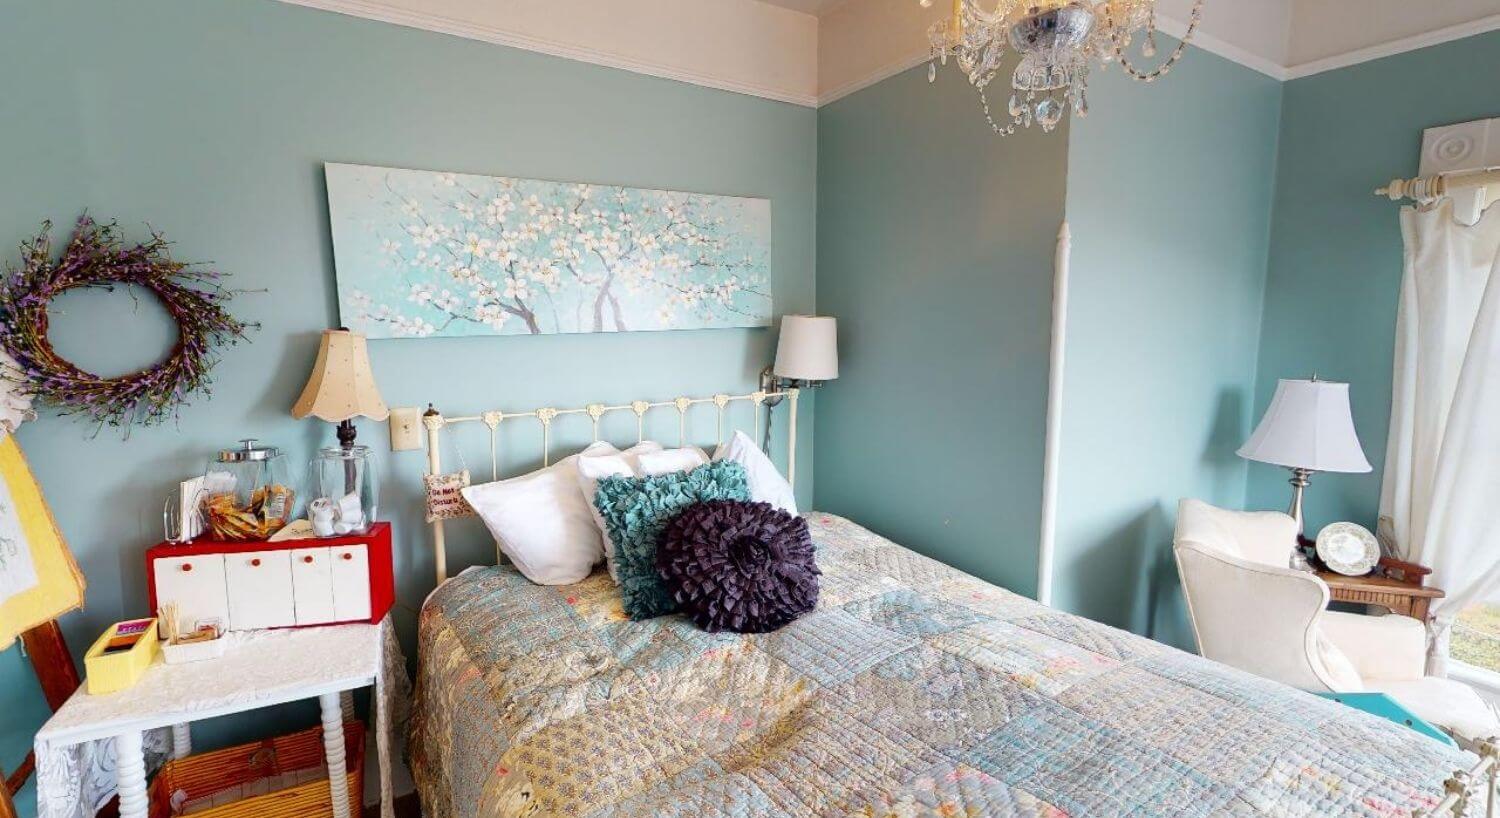 	Bed with pastel colored quilt, white iron bed frame and blue walls